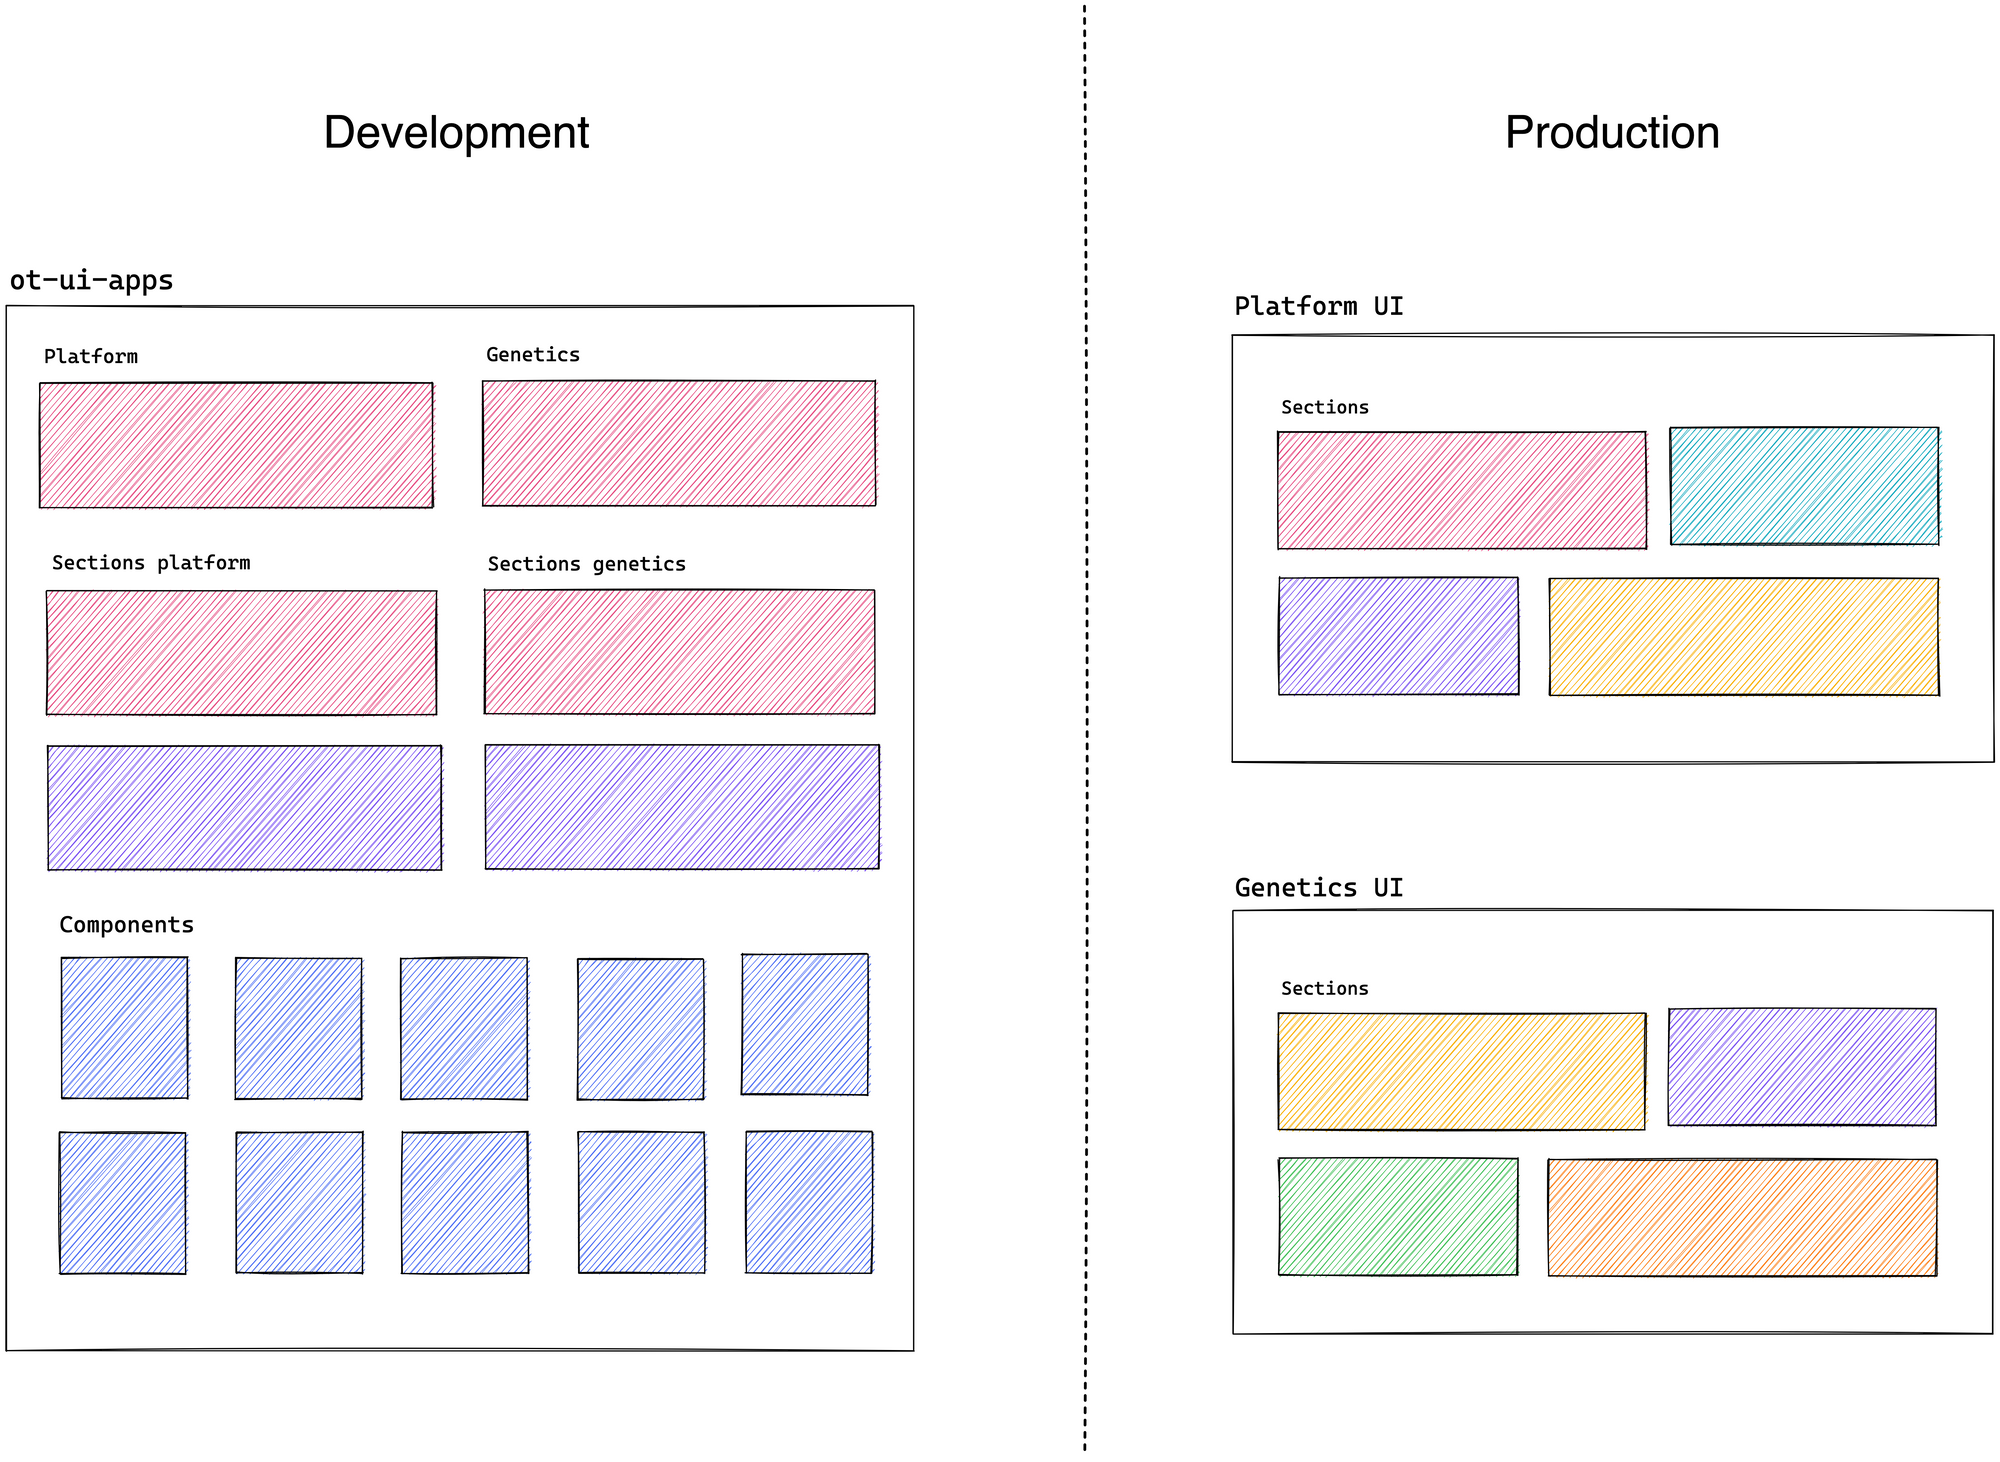 On the development side, ot-ui-apps contains different sections for the Platform and Genetics, but identical components that can be shared by both UIs. On the production side, the Platform and Genetics UIs are shown as pages with different coloured sections.